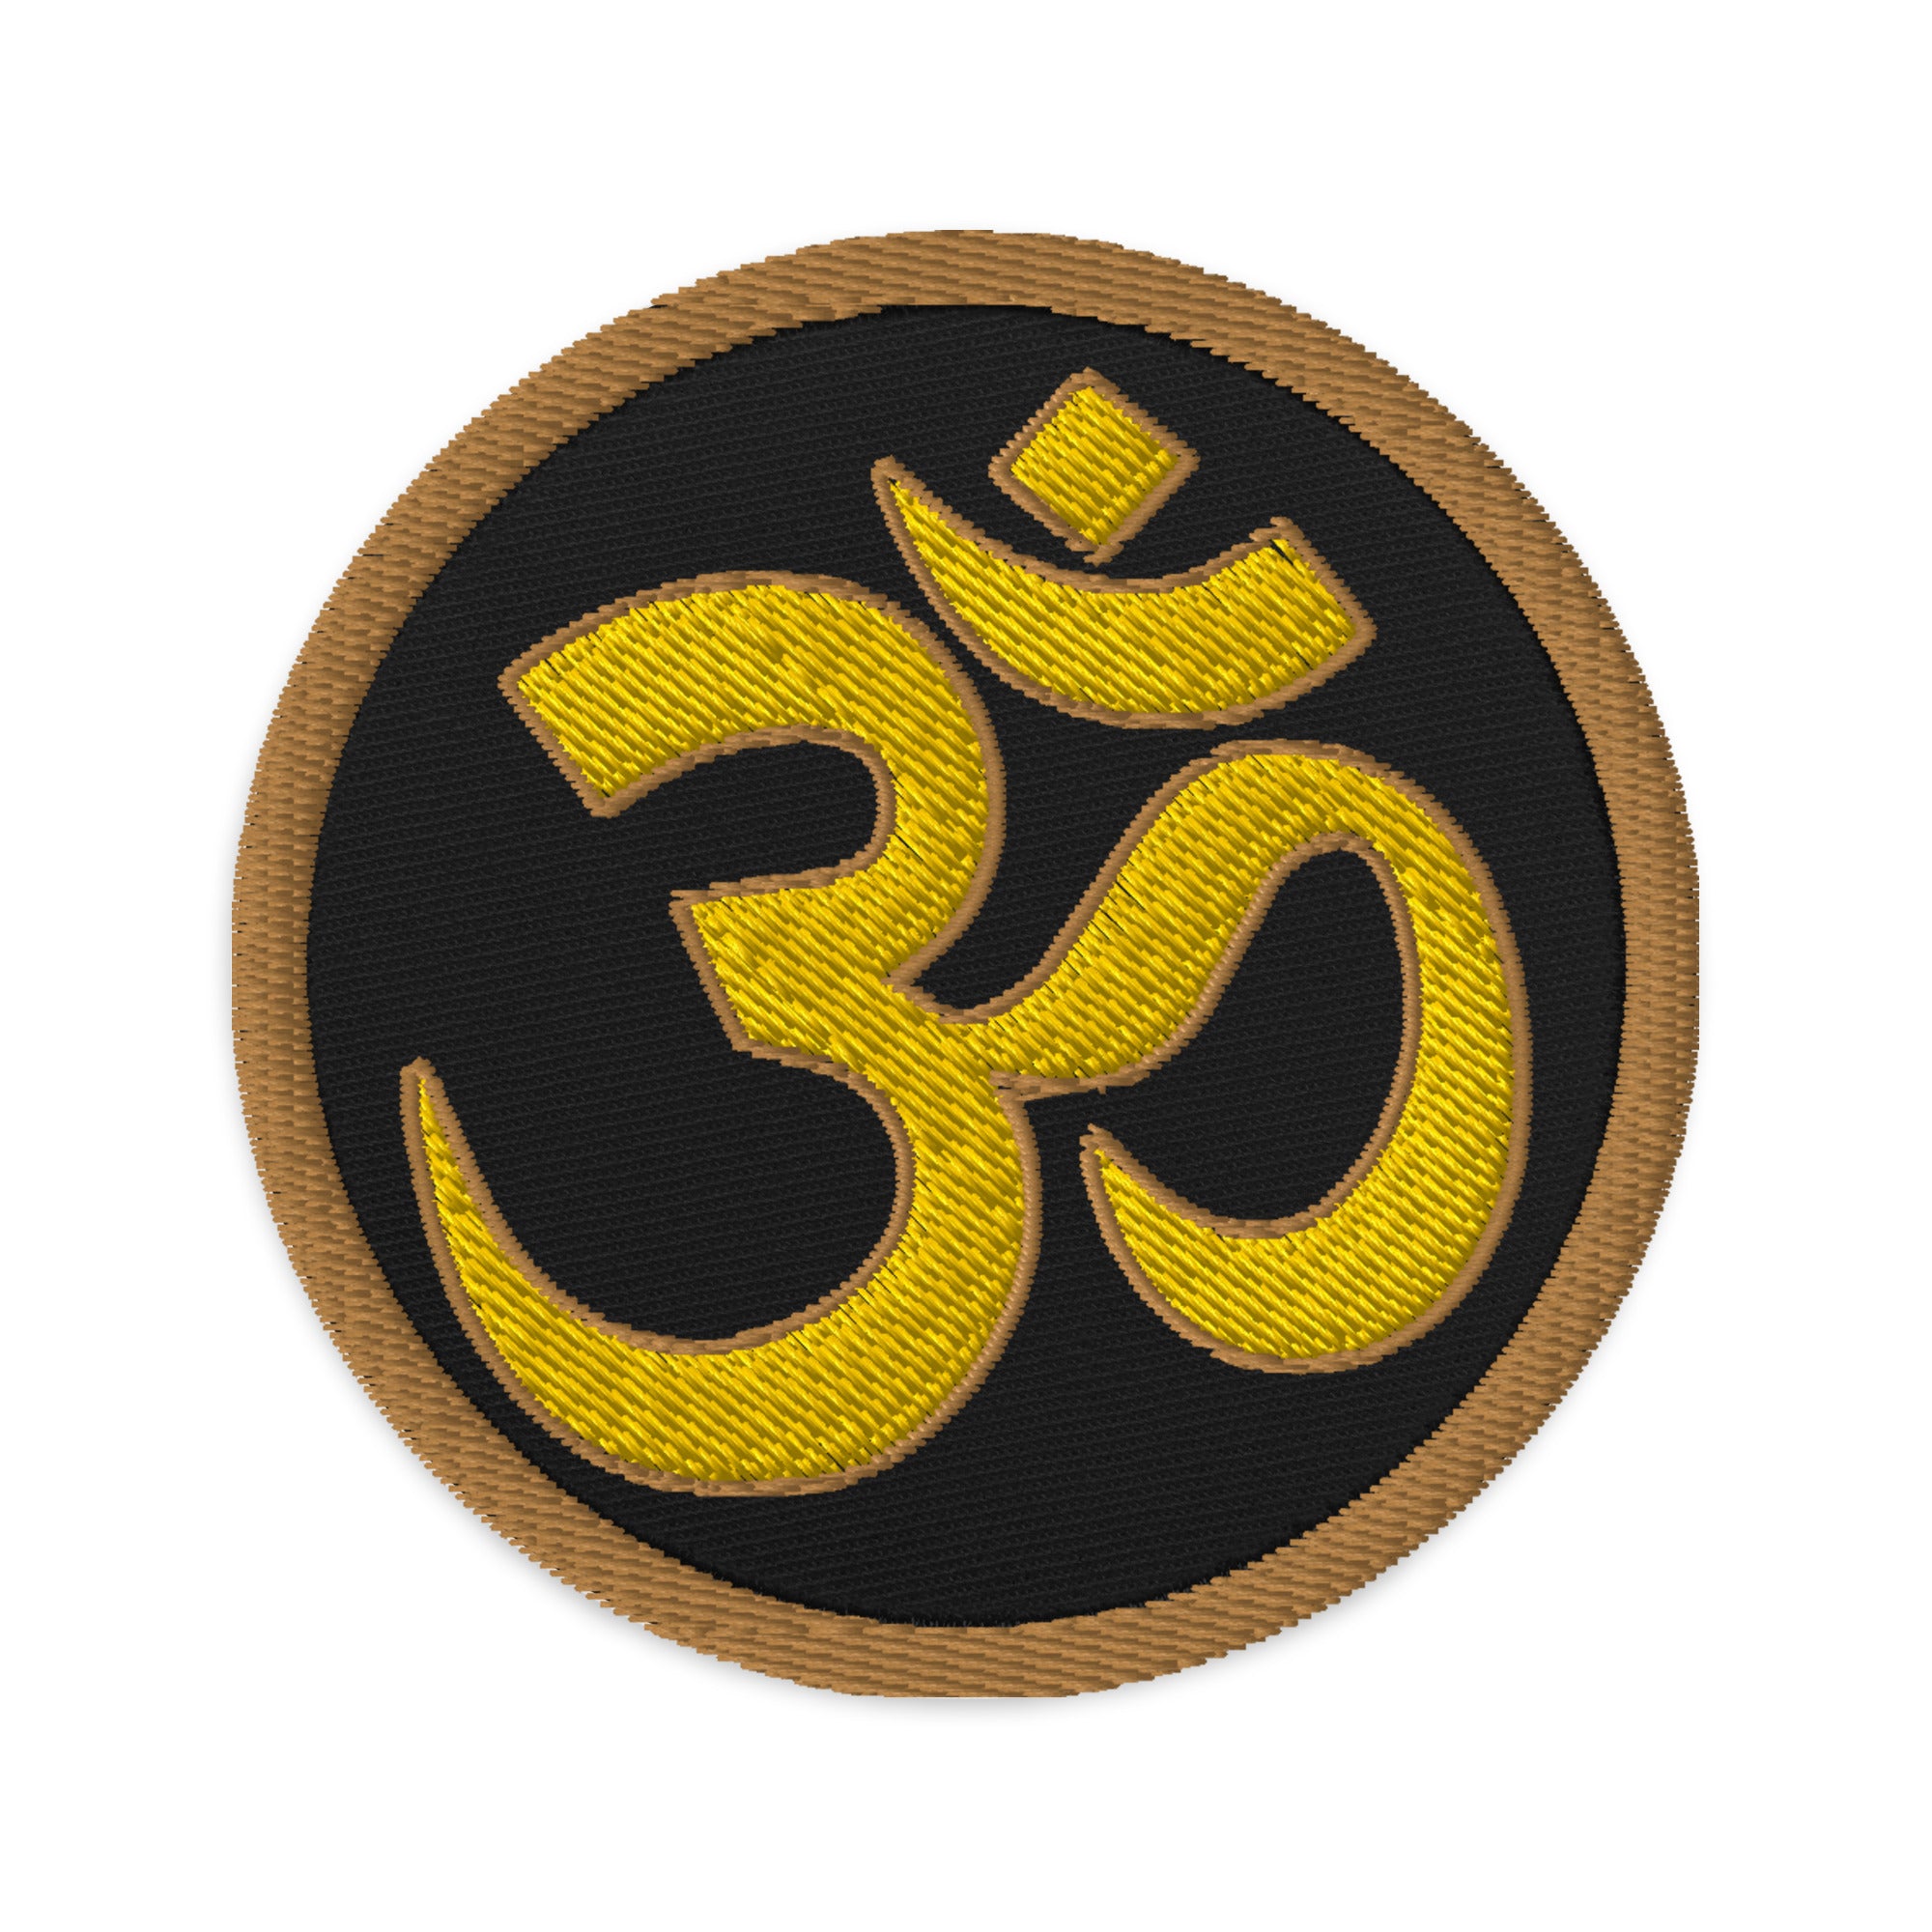 OM Sacred Spiritual Symbol Embroidered Patch Vibration of the Universe - Edge of Life Designs